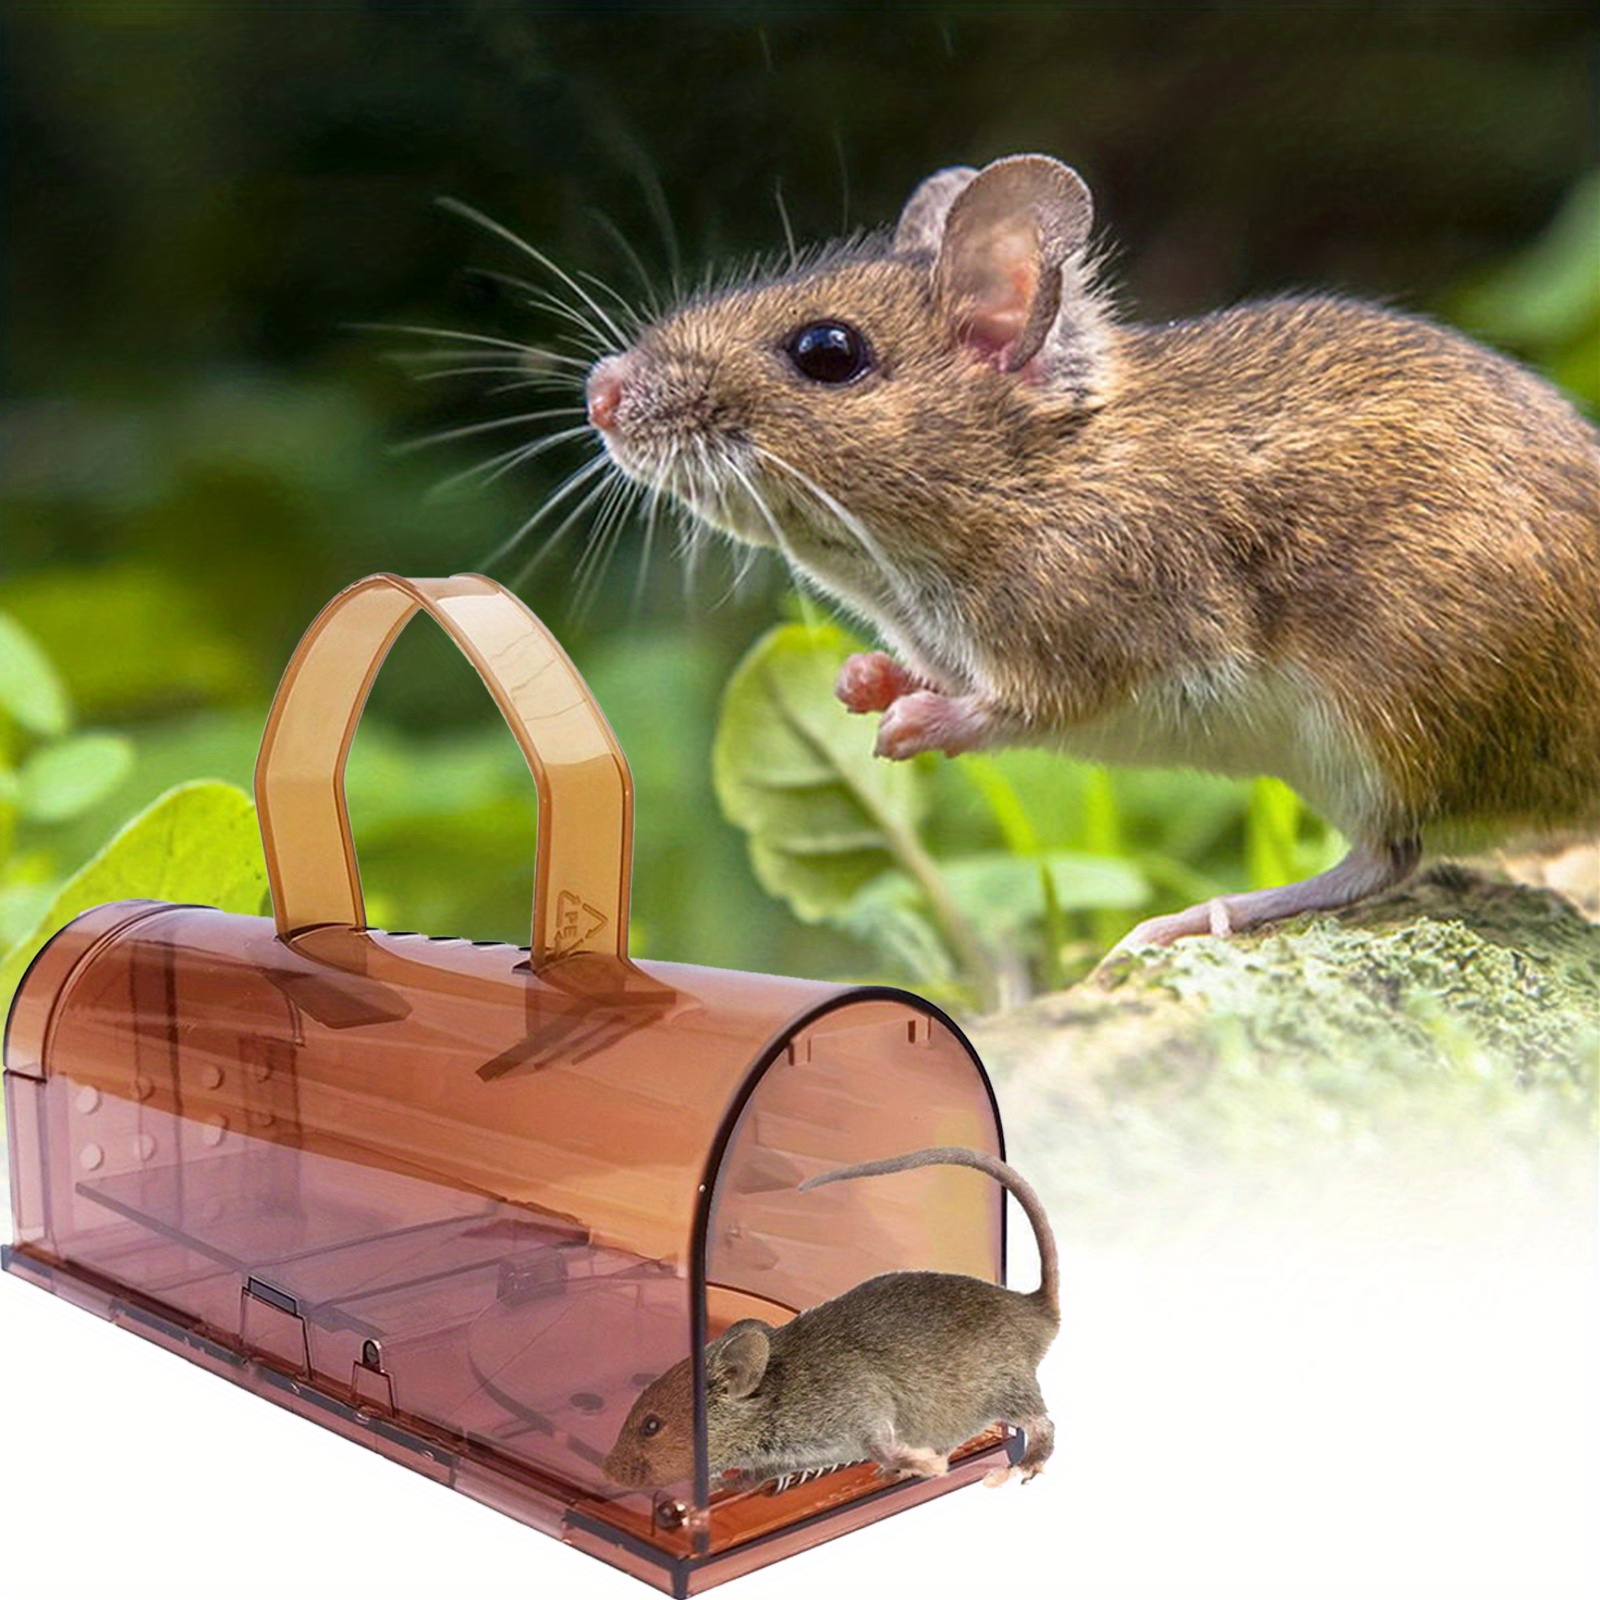 2 Pack Humane Mouse Trap, Catch And Release Mouse Traps That Work